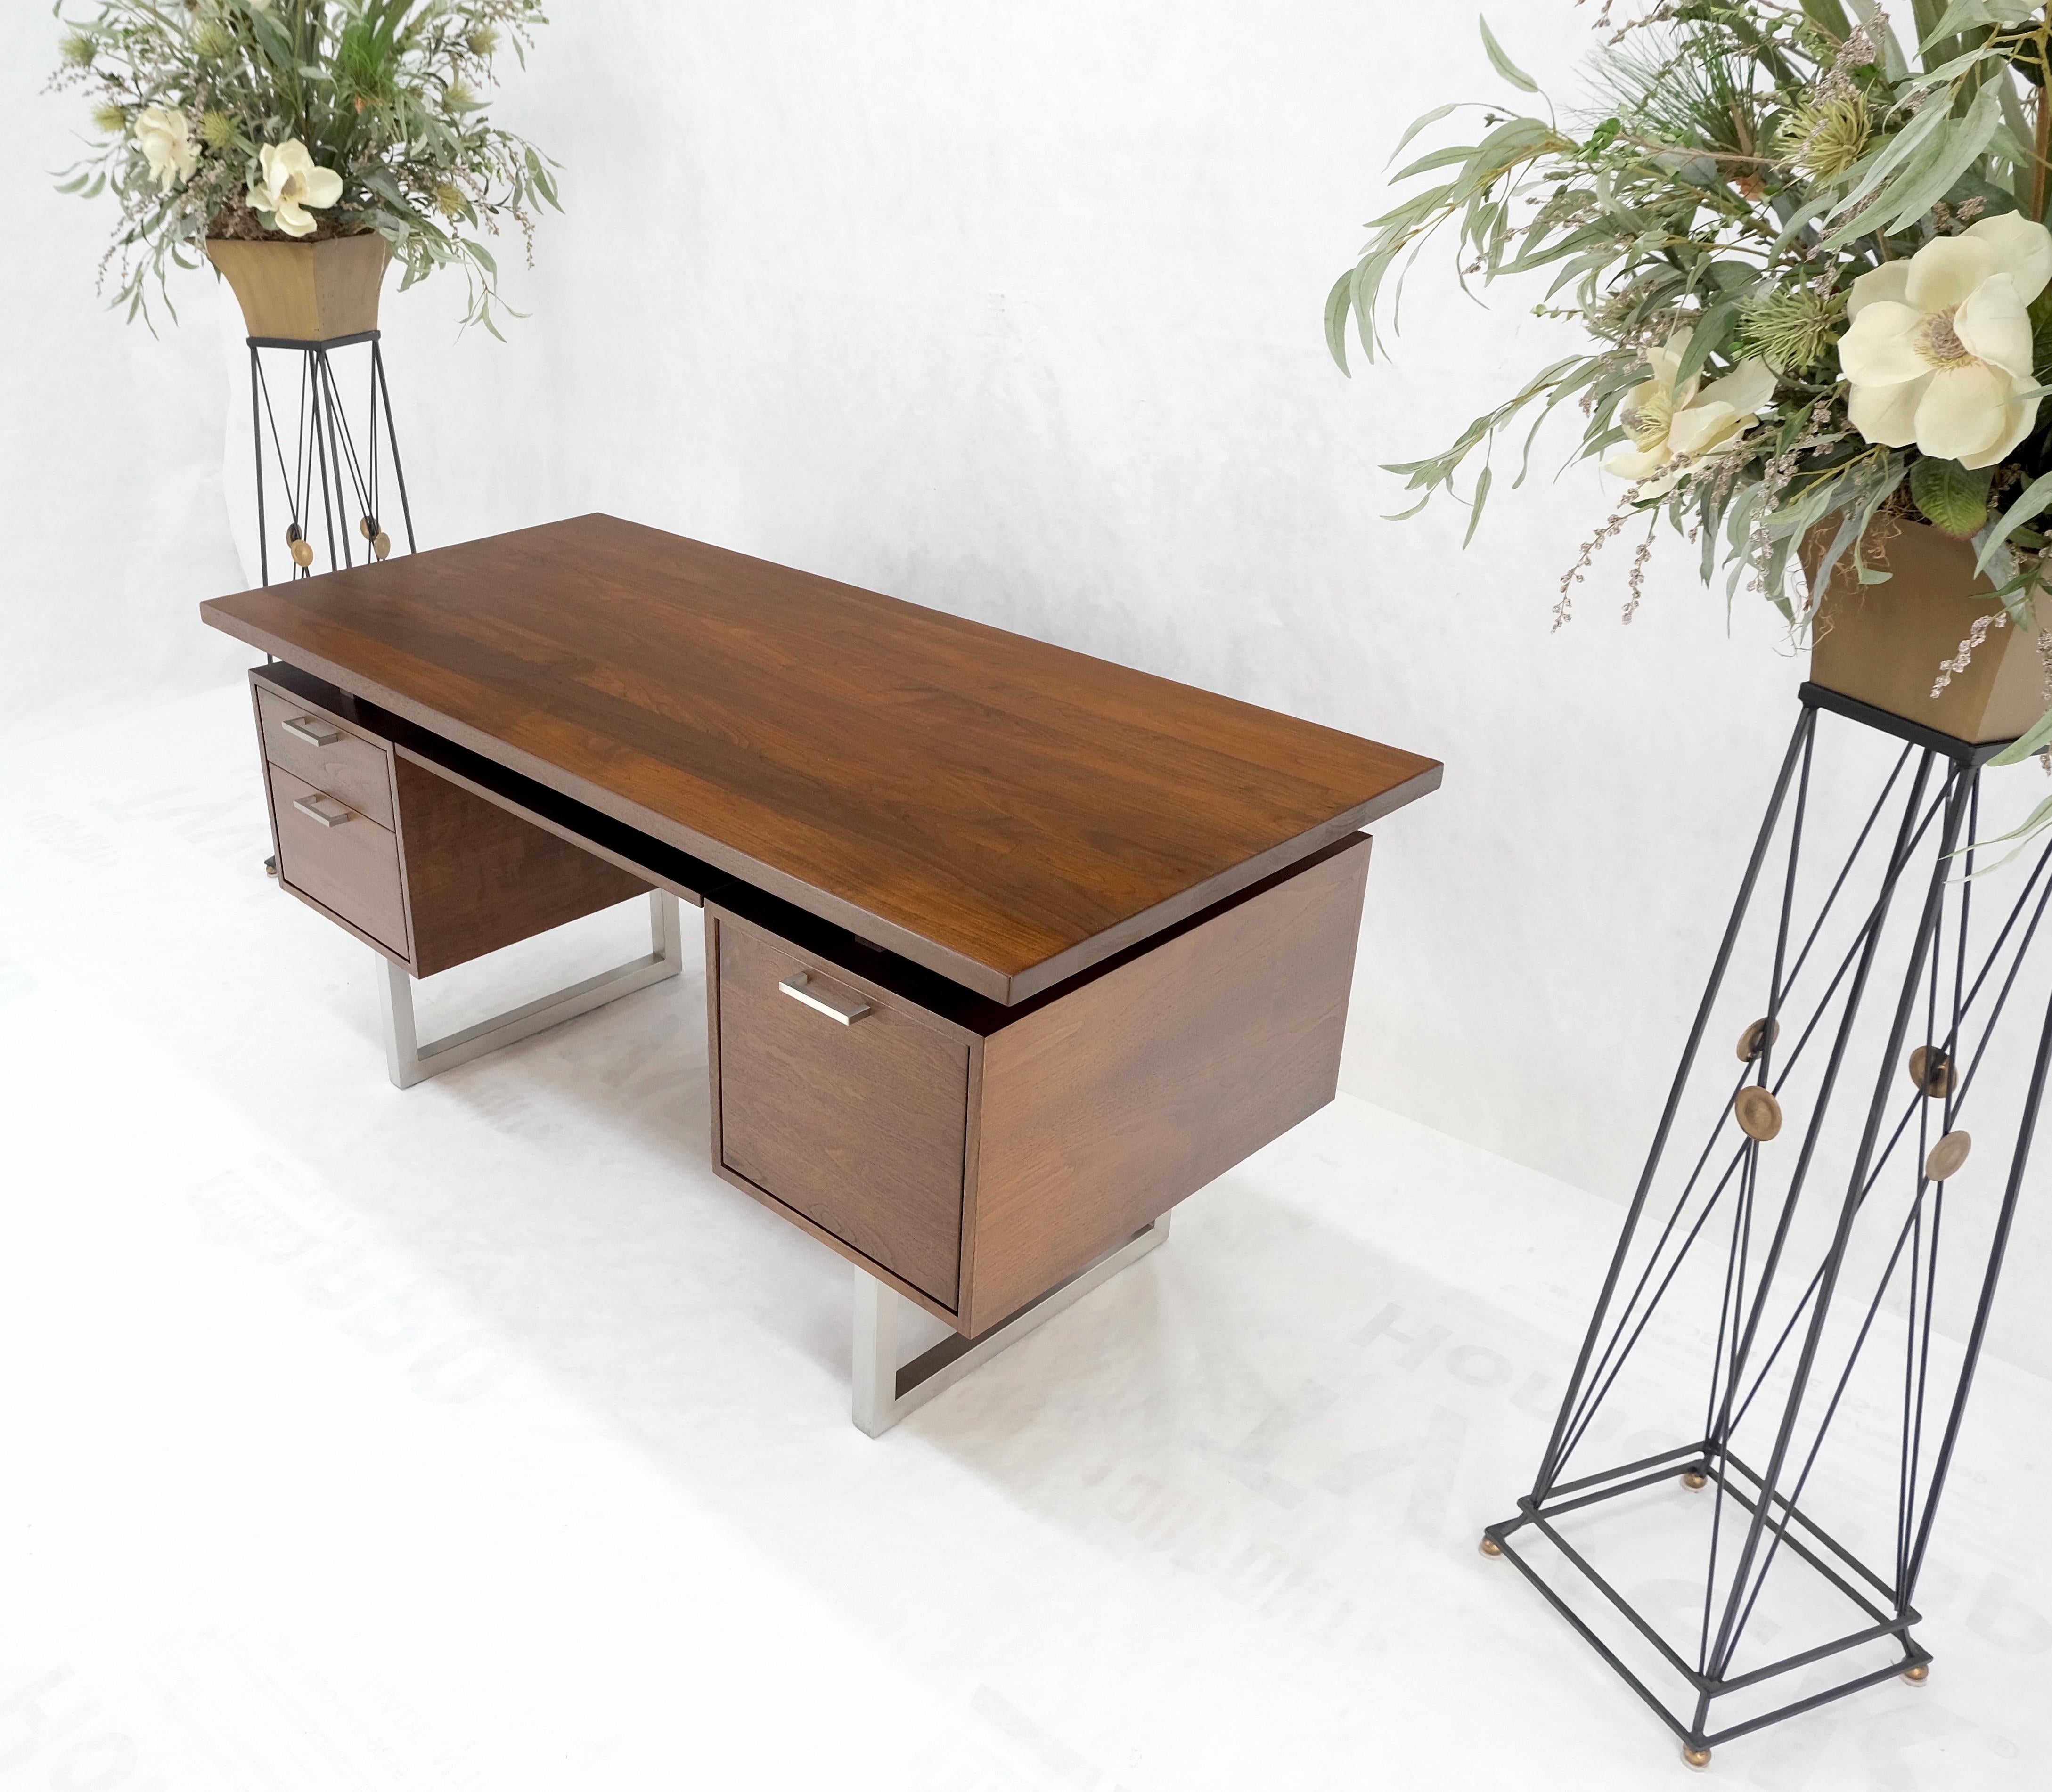 20th Century Solid Walnut Mid-Century Modern Floating Top All Restored Desk Table Mint! For Sale